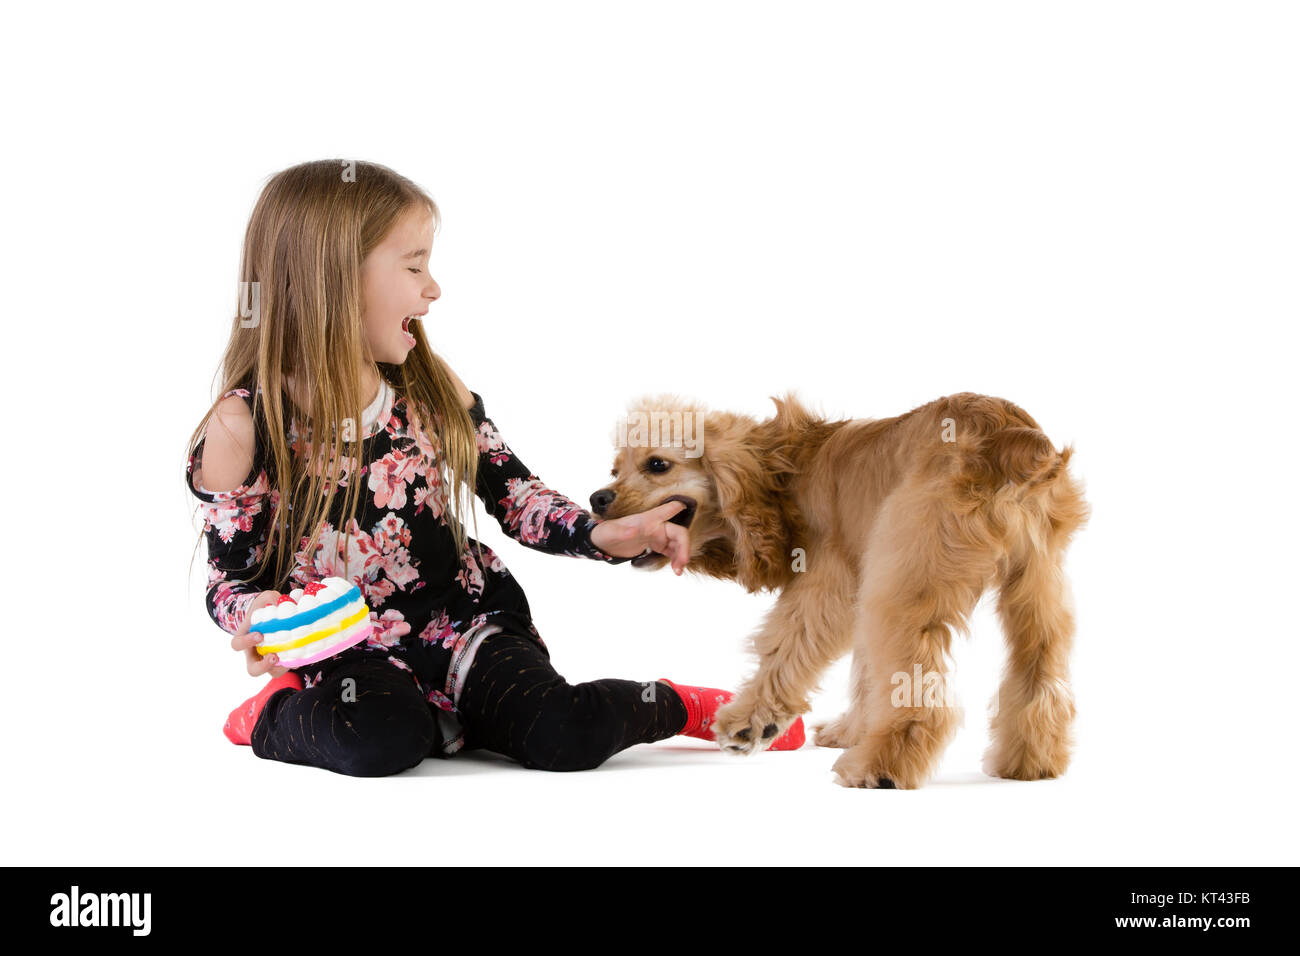 Happy young girl laughing as she plays with her young golden cocker spaniel puppy as they sit together on the floor over white Stock Photo